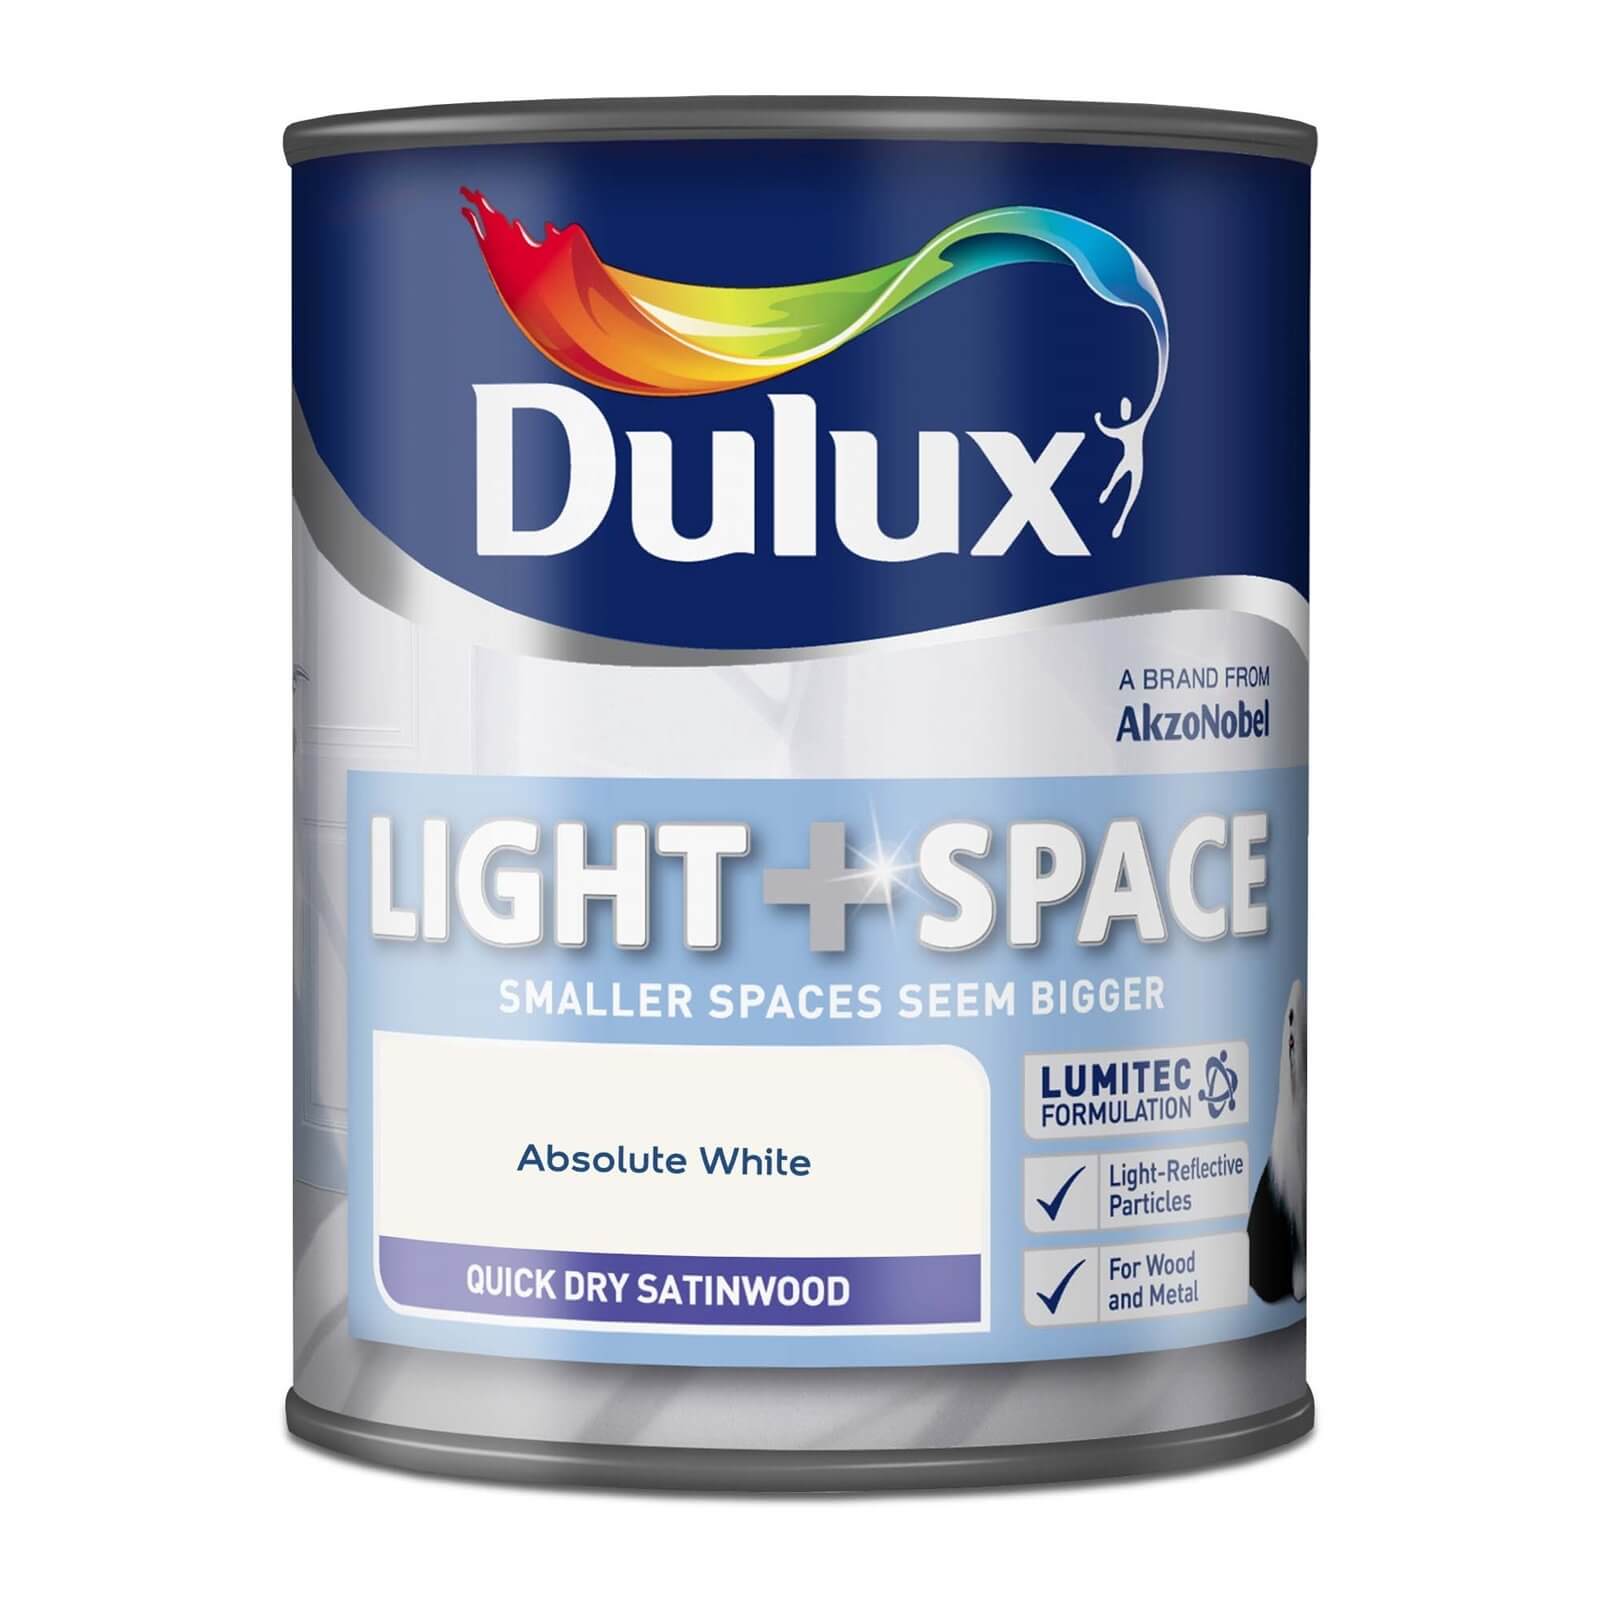 Dulux Quick Dry Satinwood Paint Absolute White - 750ml